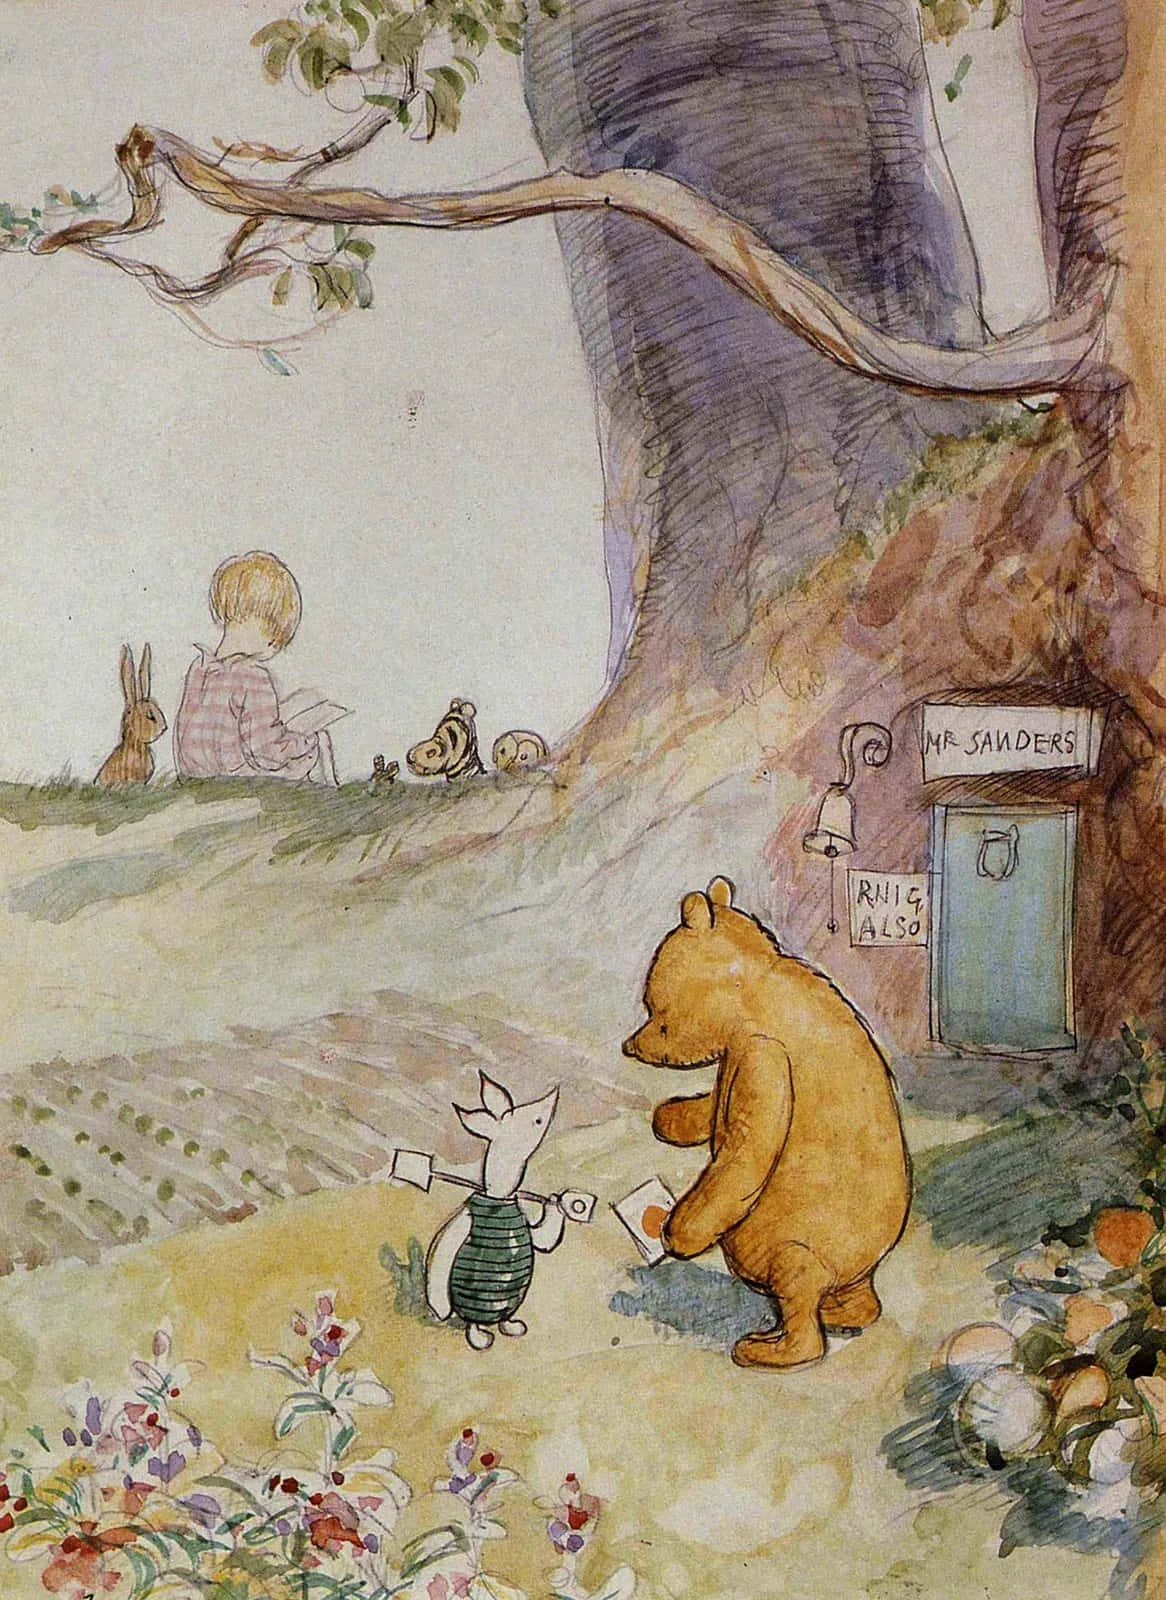 A Heartwarming Adventure In The Hundred Acre Wood